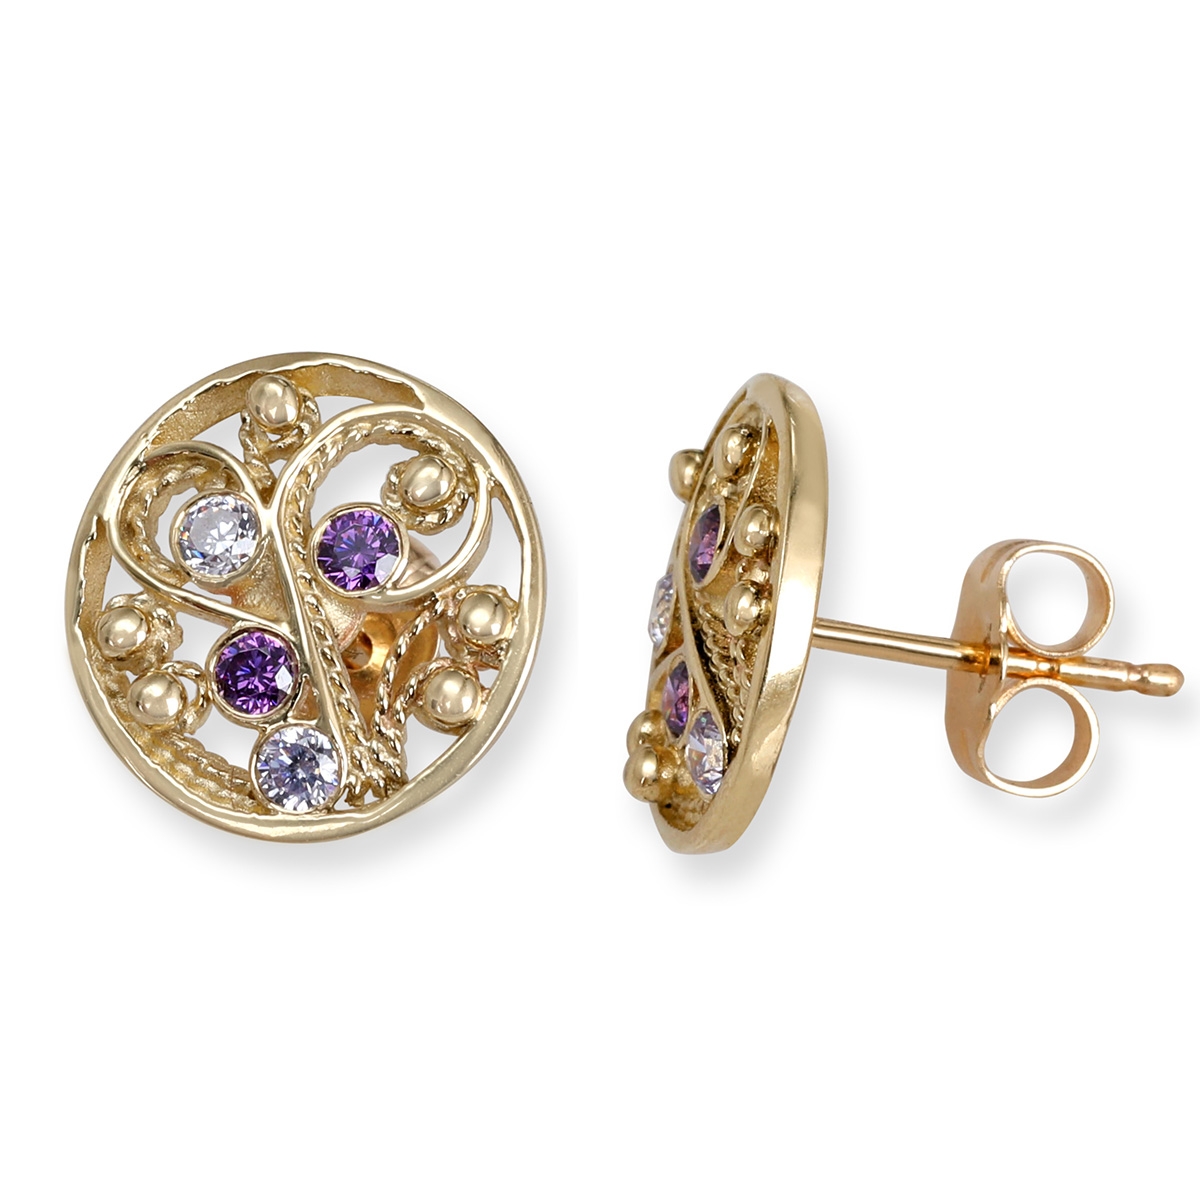 Rafael Jewelry Handcrafted 14K Yellow Gold Filigree Earrings With Amethyst and Lavender Stones - 1